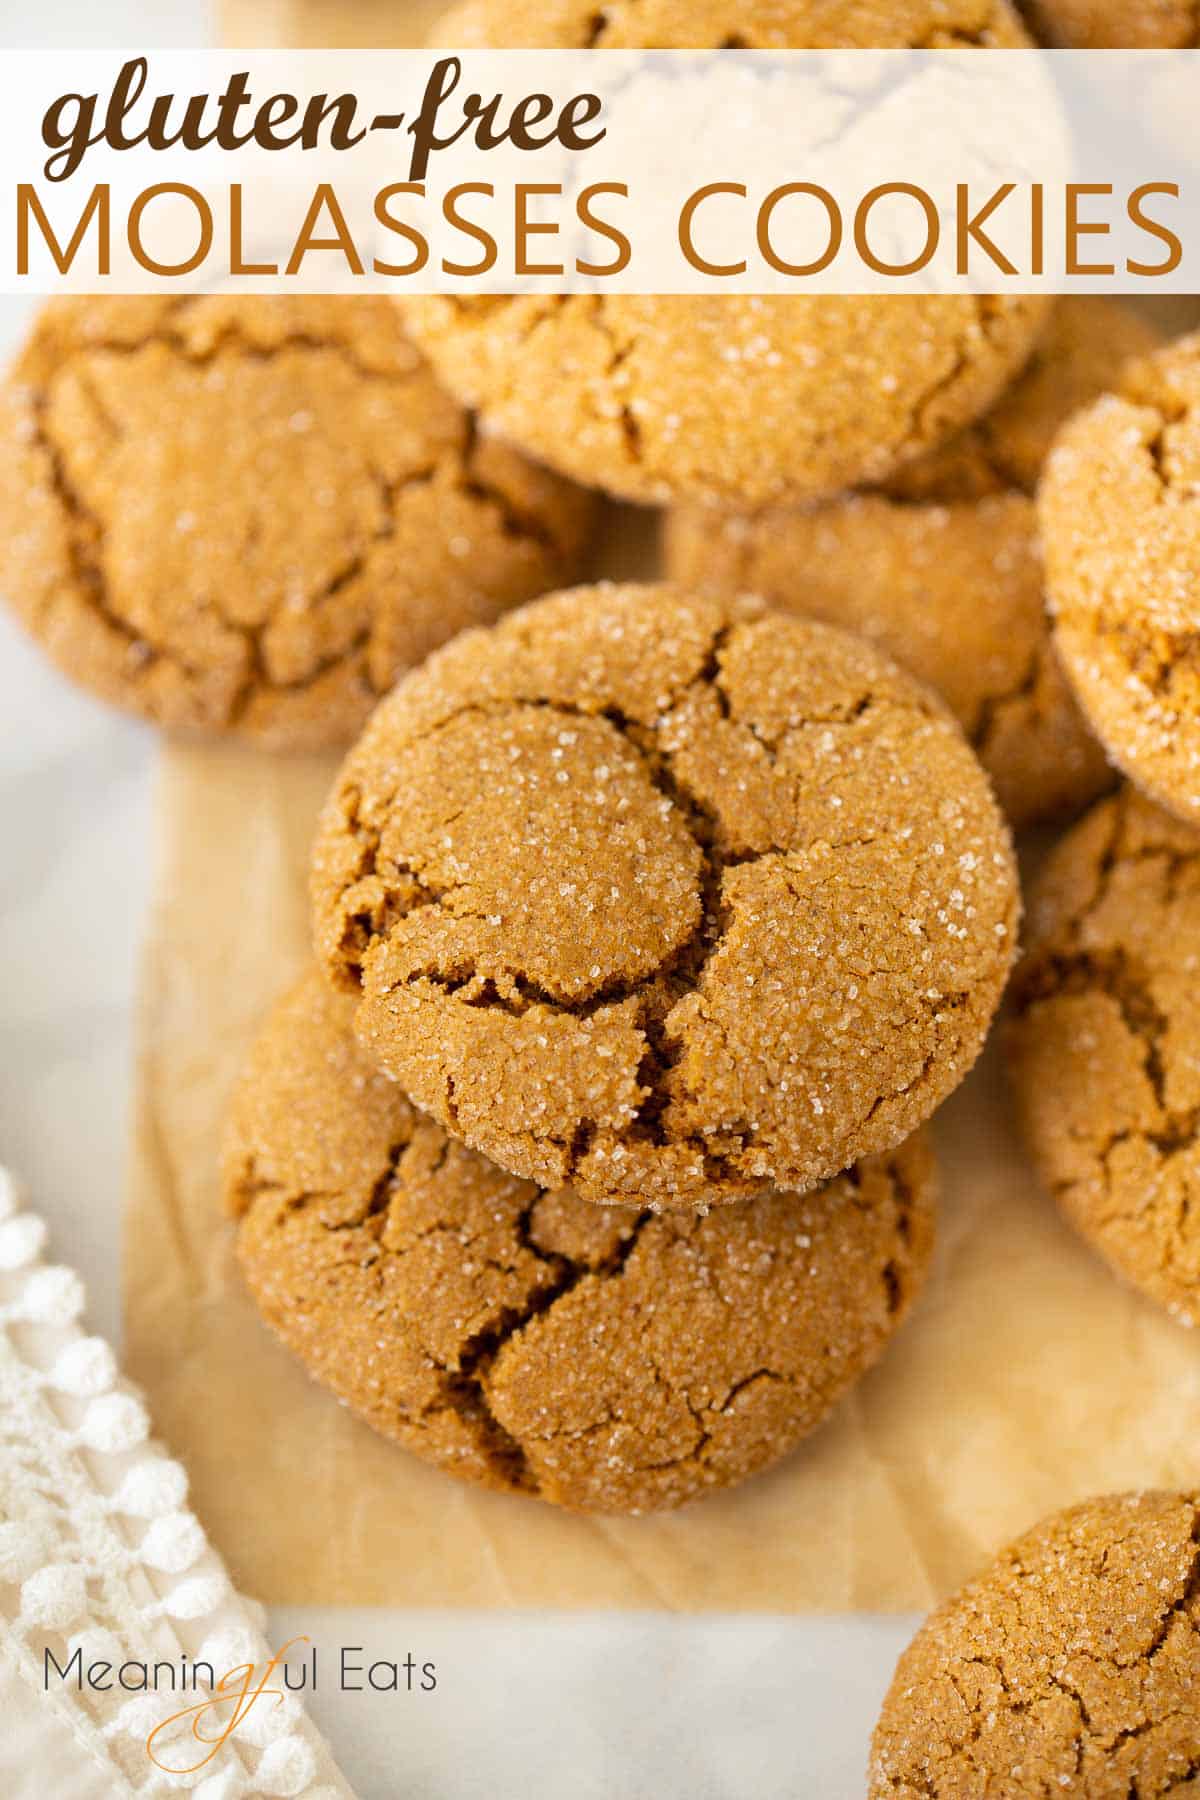 image for pinterest of molasses cookies stacked on brown parchment